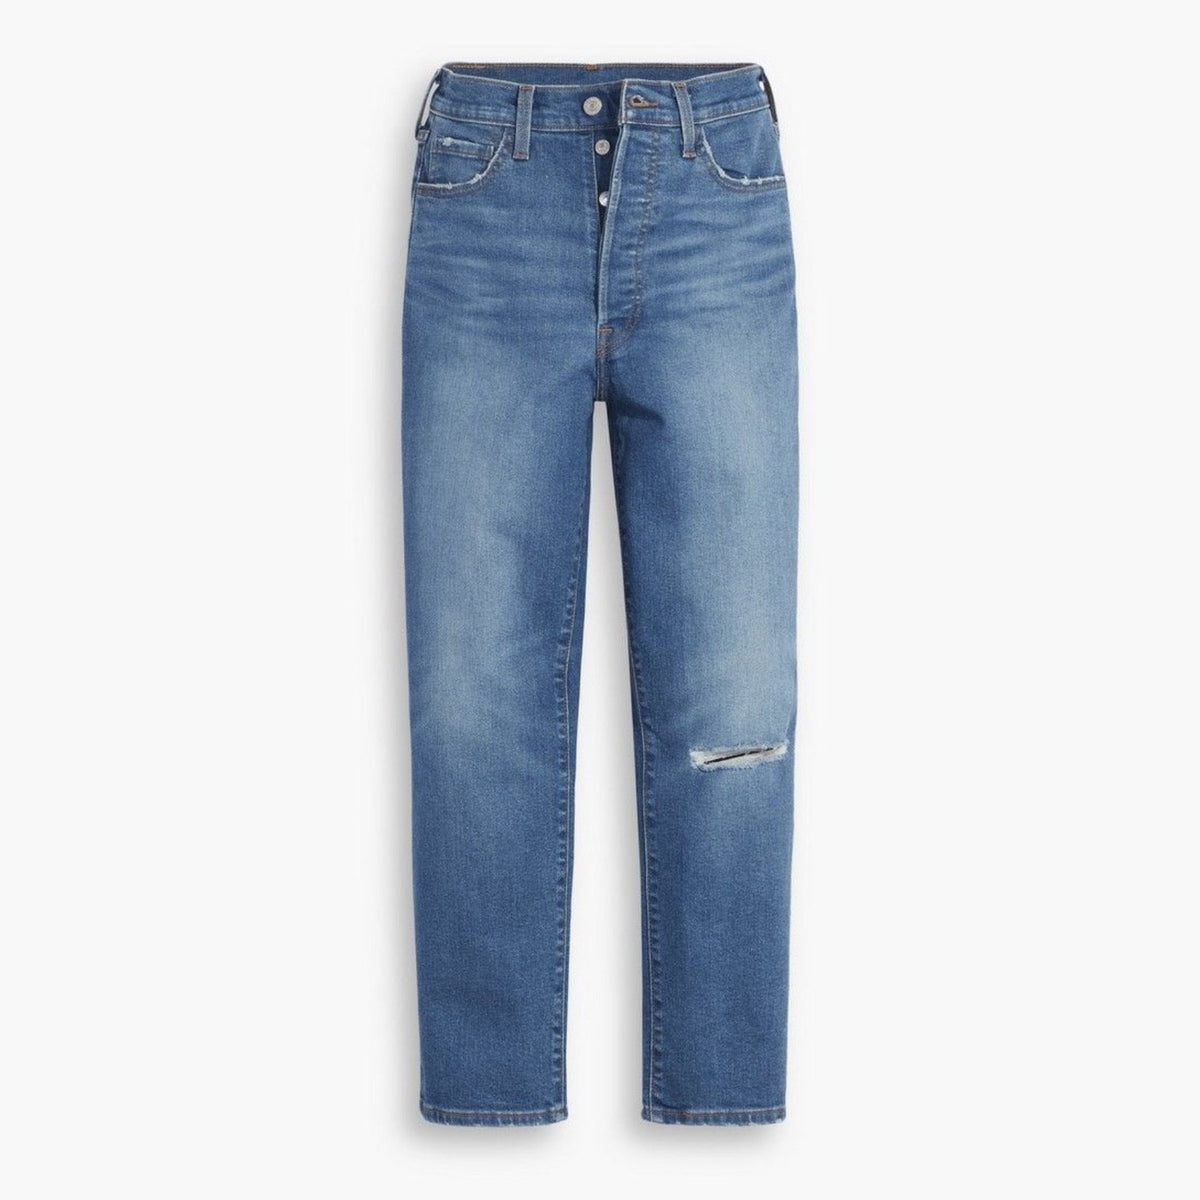 Levi's Wedgie Straight Jean Fall Star